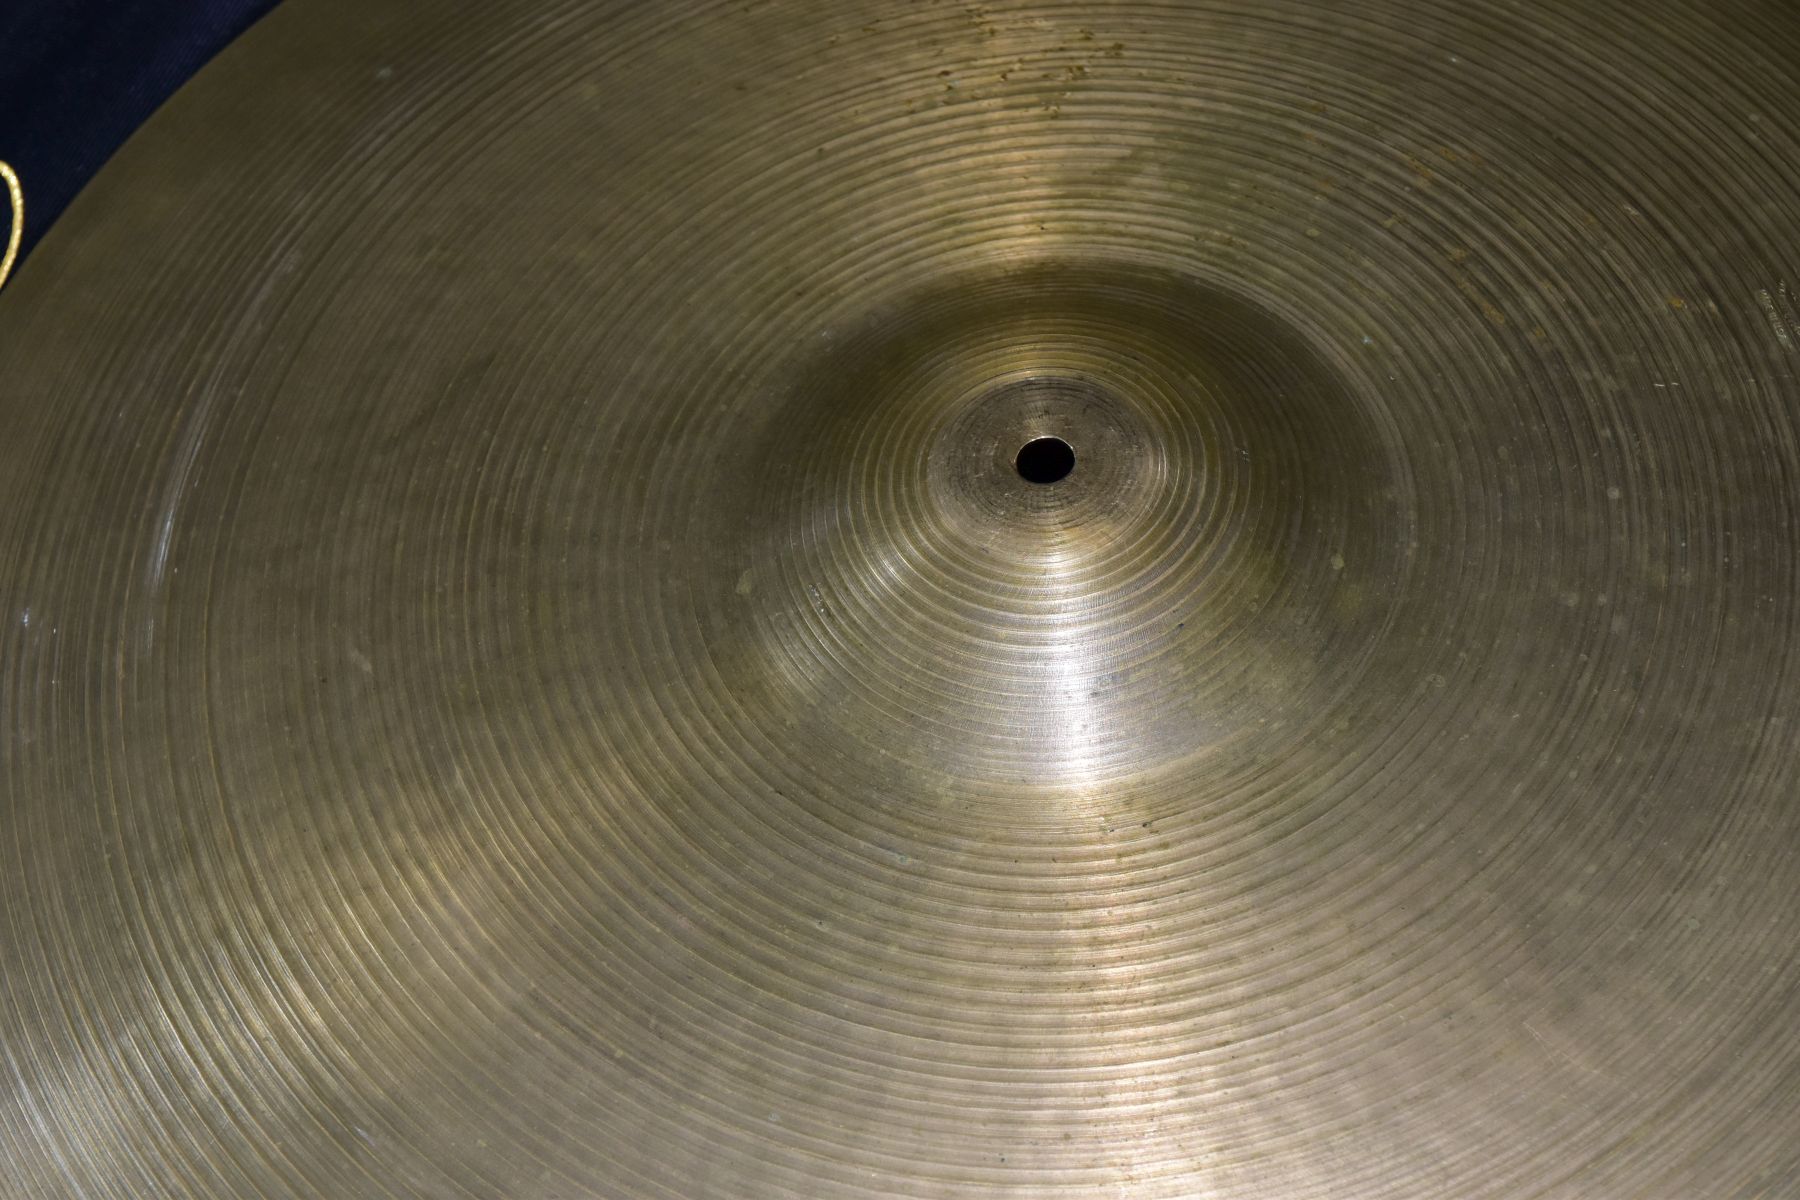 A 1960'S ZILDJIAN 22 INCH RIDE CYMBAL (WEIGHS MORE THAN 3KG) in a Stagg padded cymbal case - Image 2 of 3